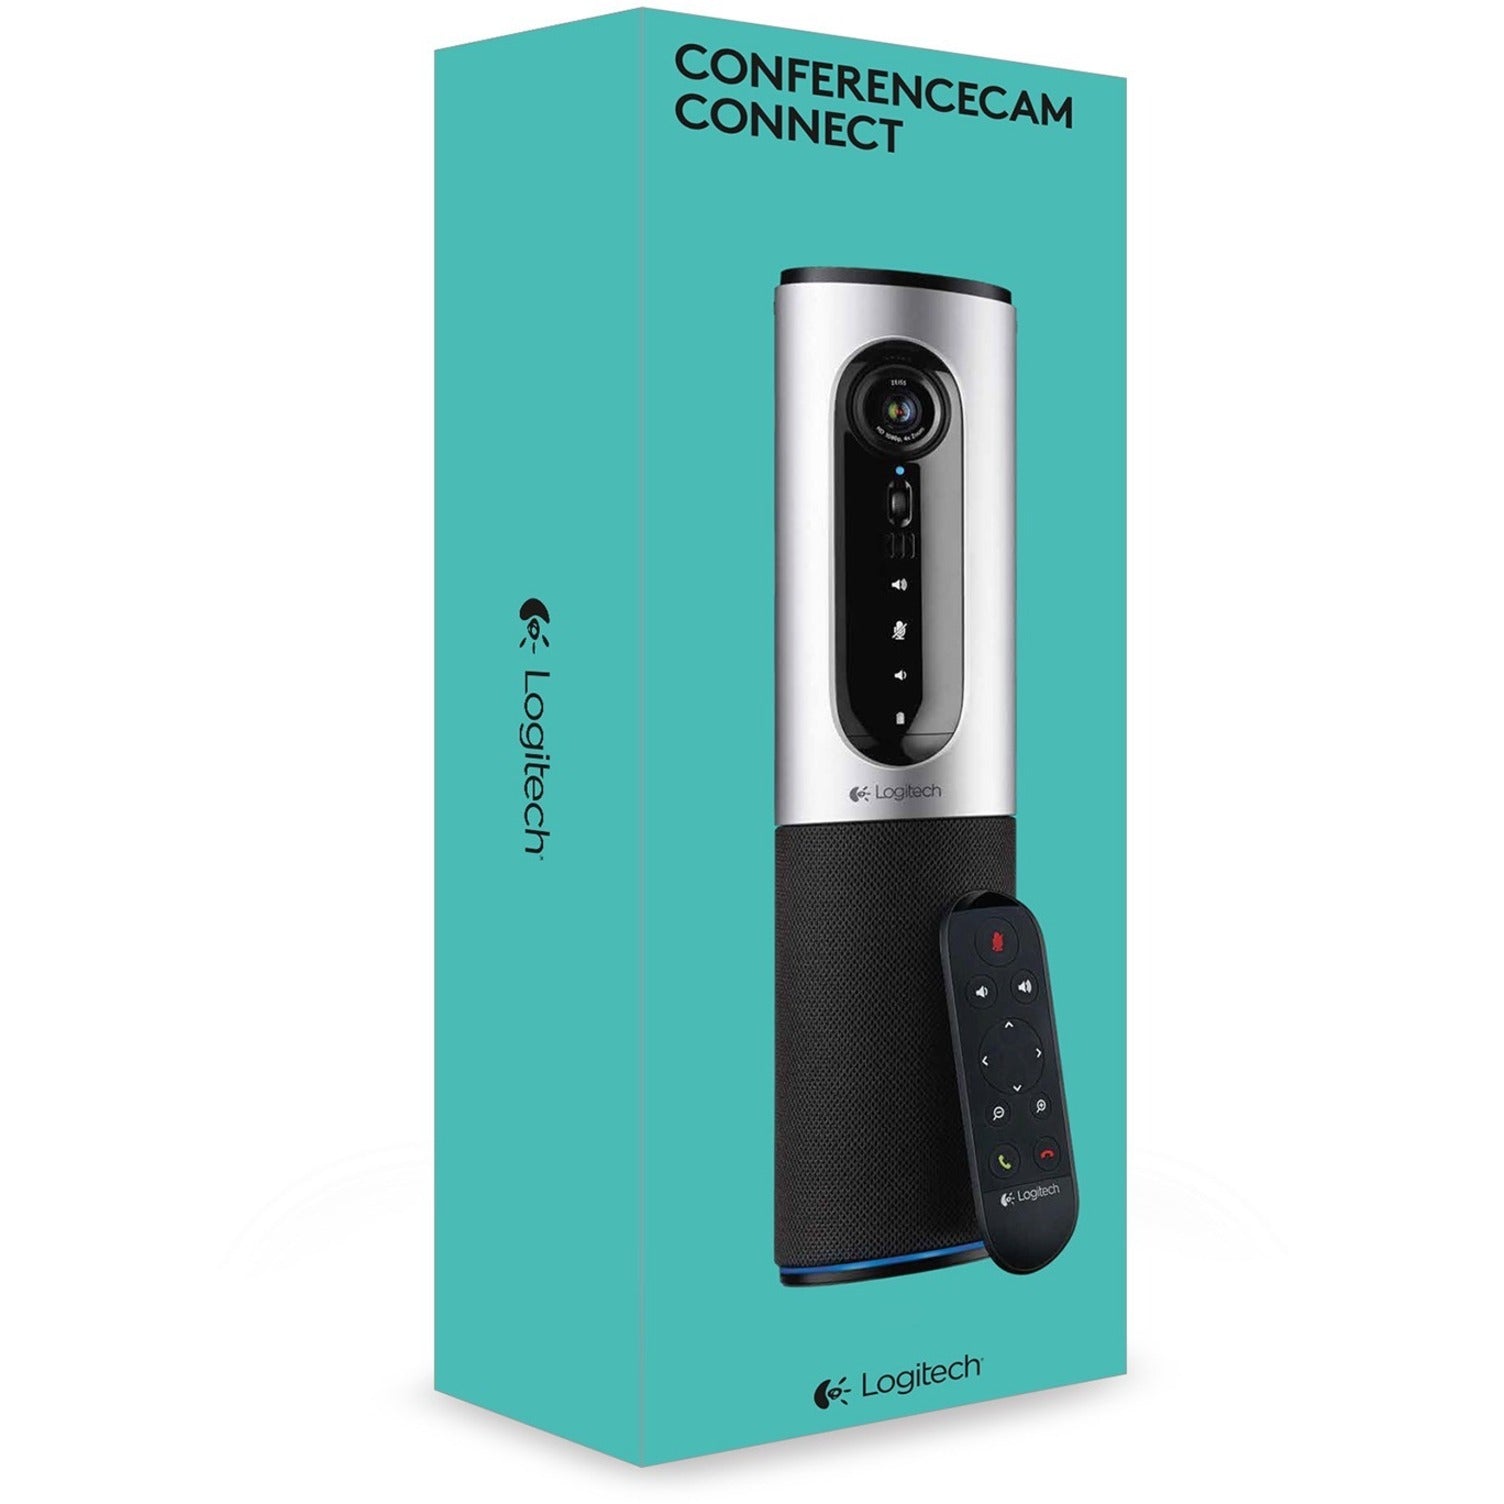 Logitech 960-001013 ConferenceCam Connect Video Conferencing Camera, Portable All-in-One Video System